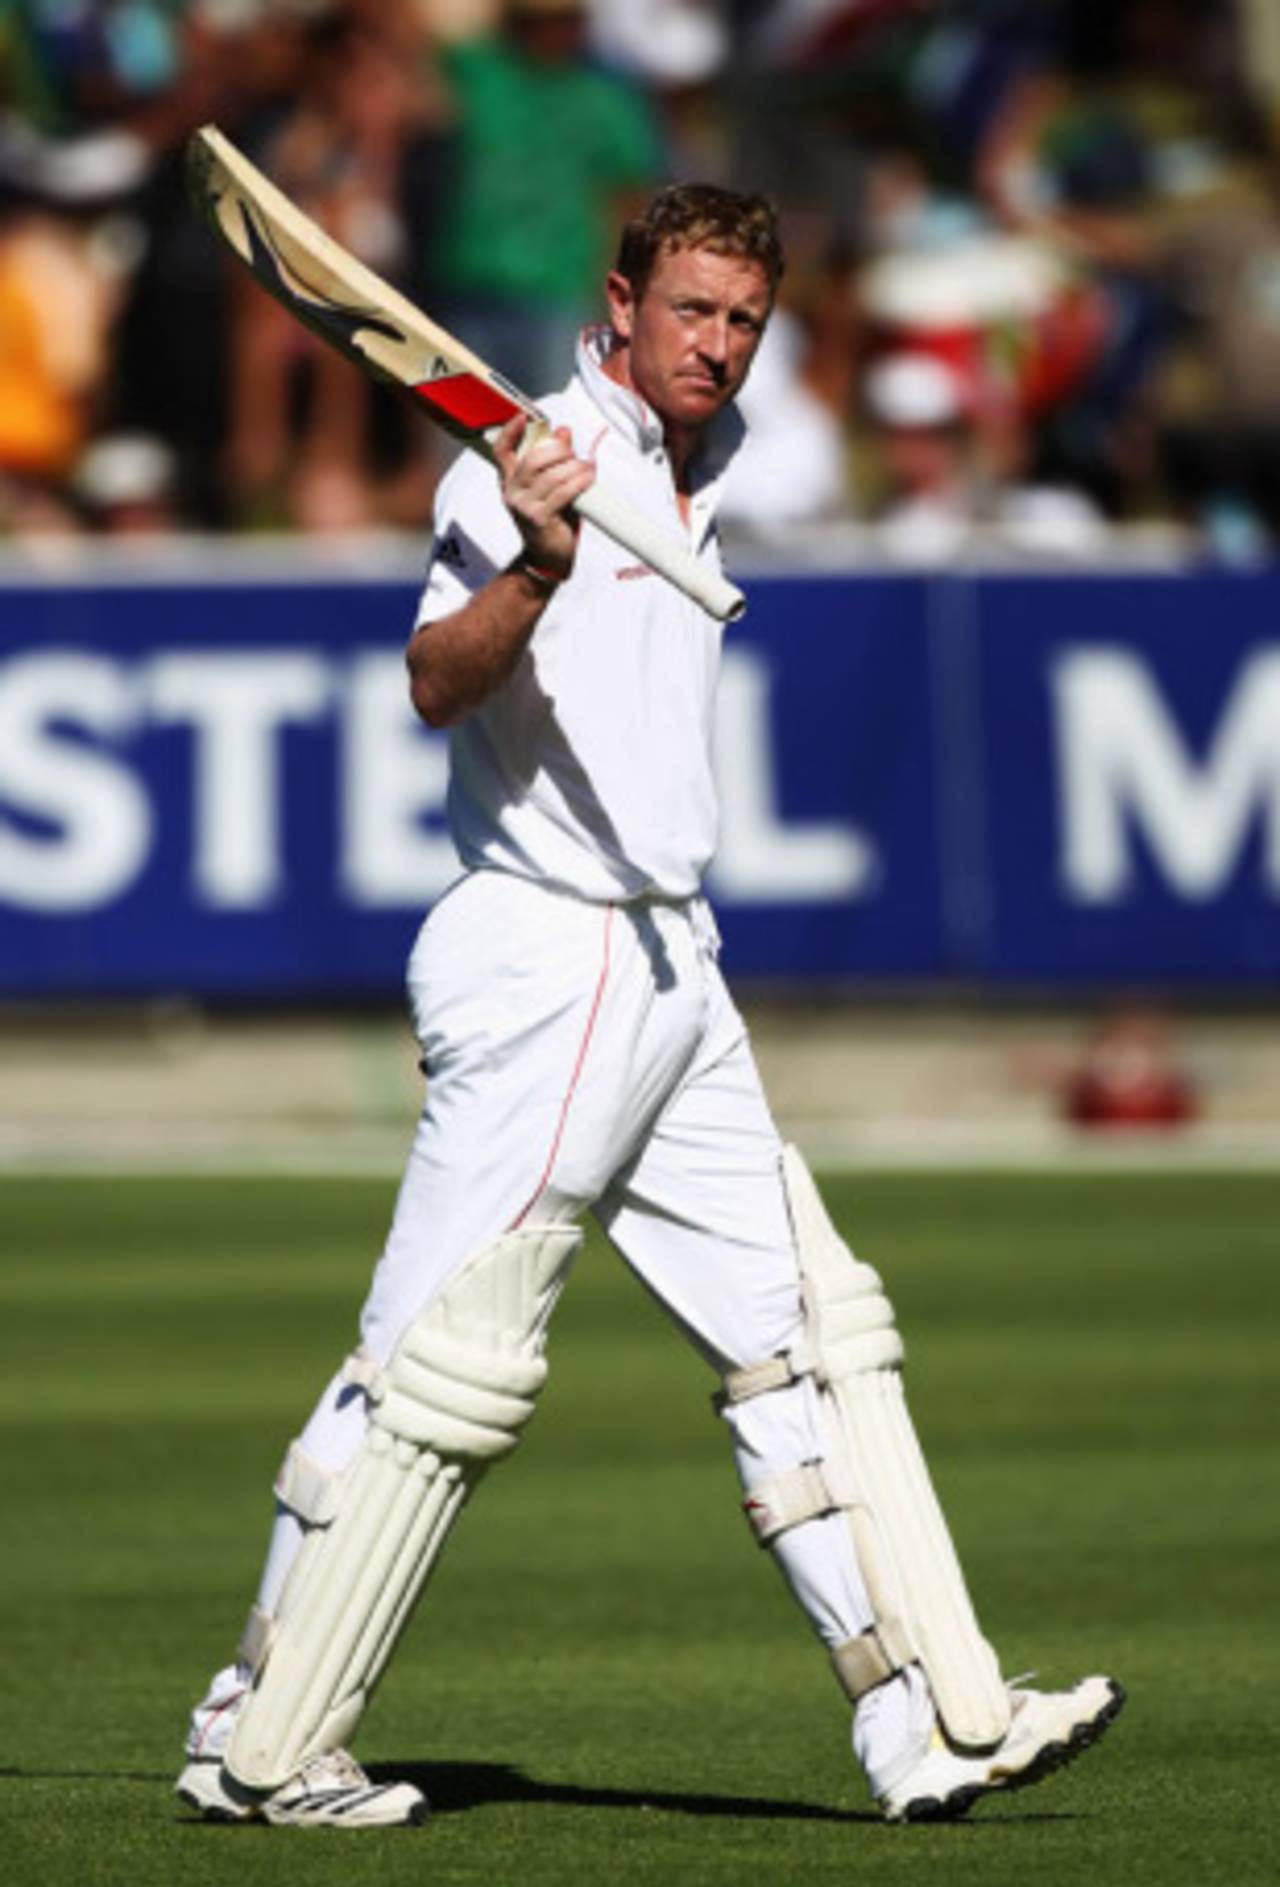 Paul Collingwood's limpet-like innings was finally ended after 188 balls, England v South Africa, 3rd Test, Cape Town, 7 January, 2010